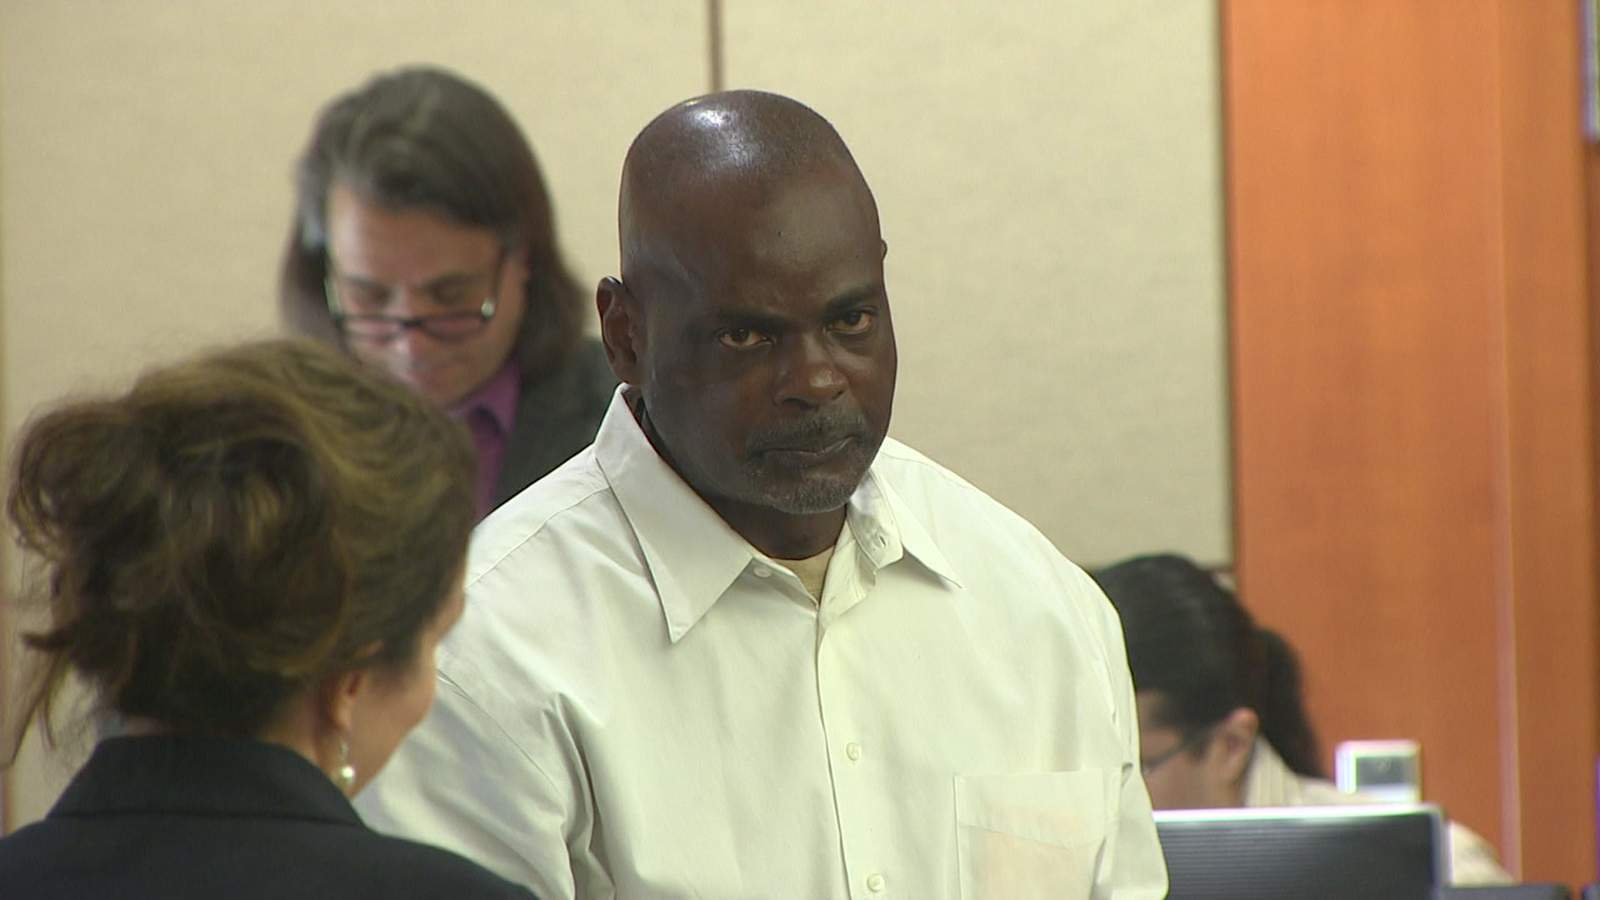 Victim of former HPD officer Gerald Goines files lawsuit after spending 7 years in prison